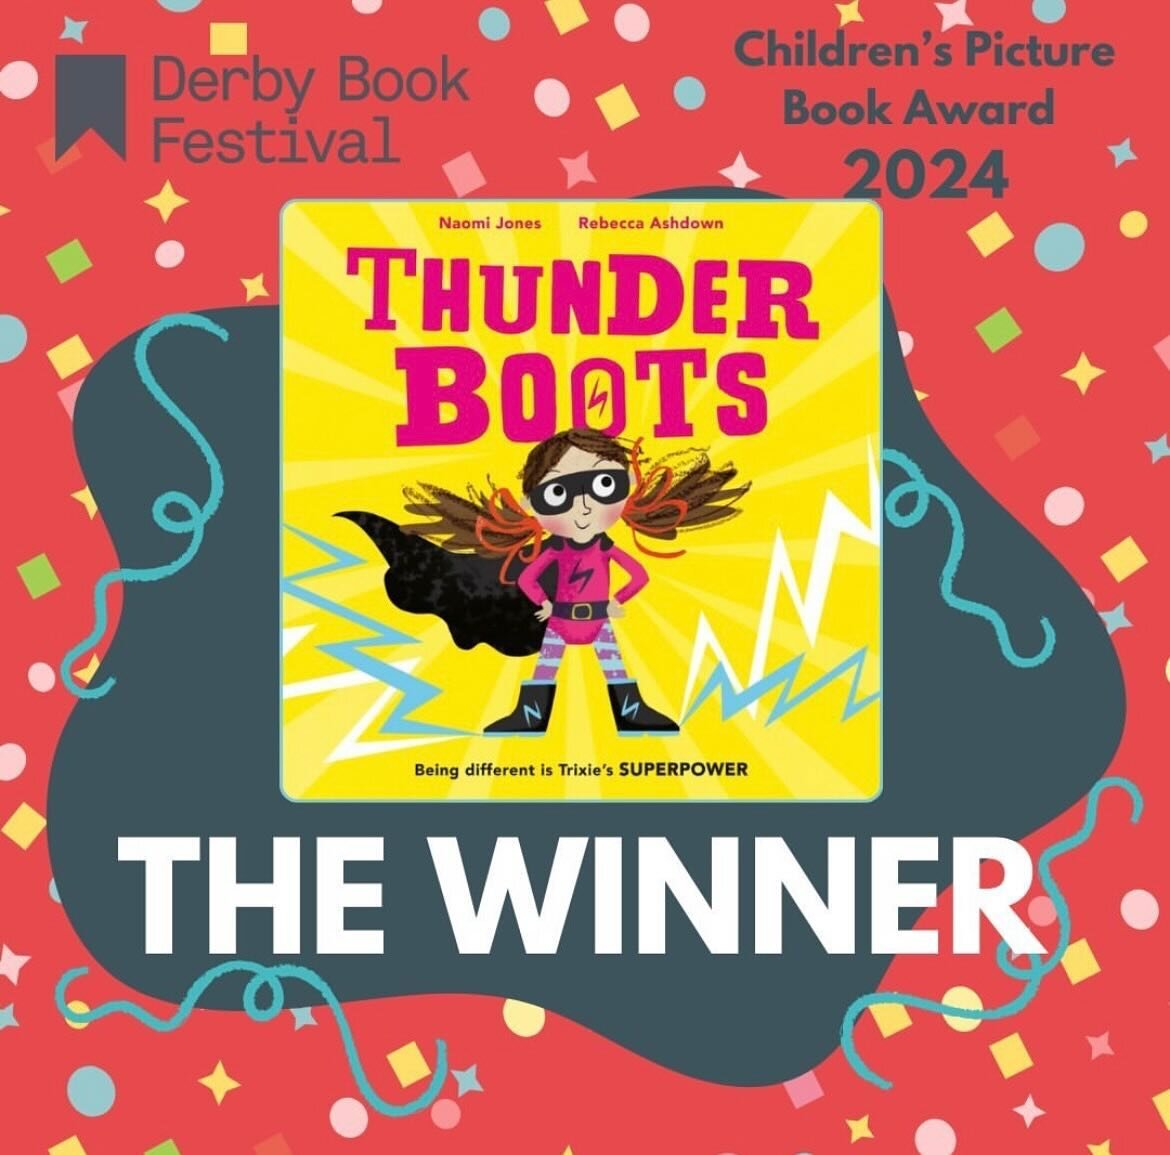 Wow! I was absolutely blown away last week to learn that Thunderboots had won the Derby Book Festival Children&rsquo;s Picture Book Award. 
⚡️
Thunderboots means so much to me as it was inspired by my own diagnosis of dyslexia. (The title was my Gran